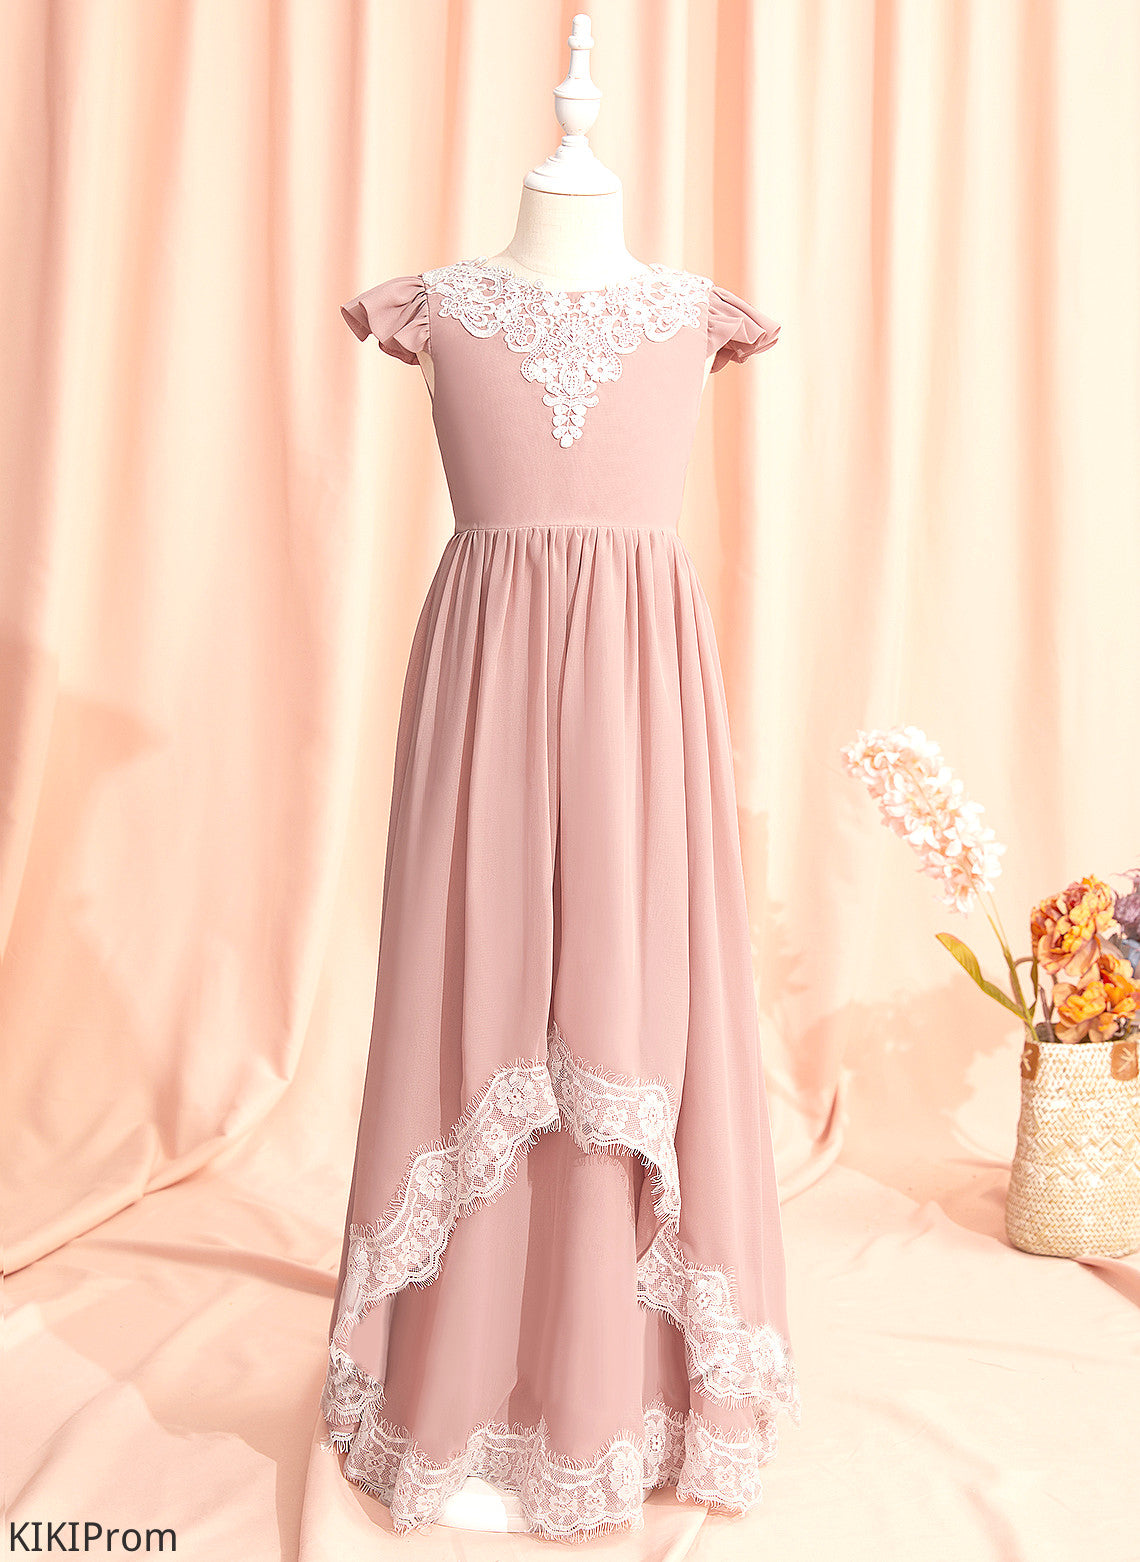 Sleeves Back Yamilet Short Girl Lace/V A-Line Neck Flower Girl Dresses Chiffon/Lace Flower Scoop With Dress Floor-length -